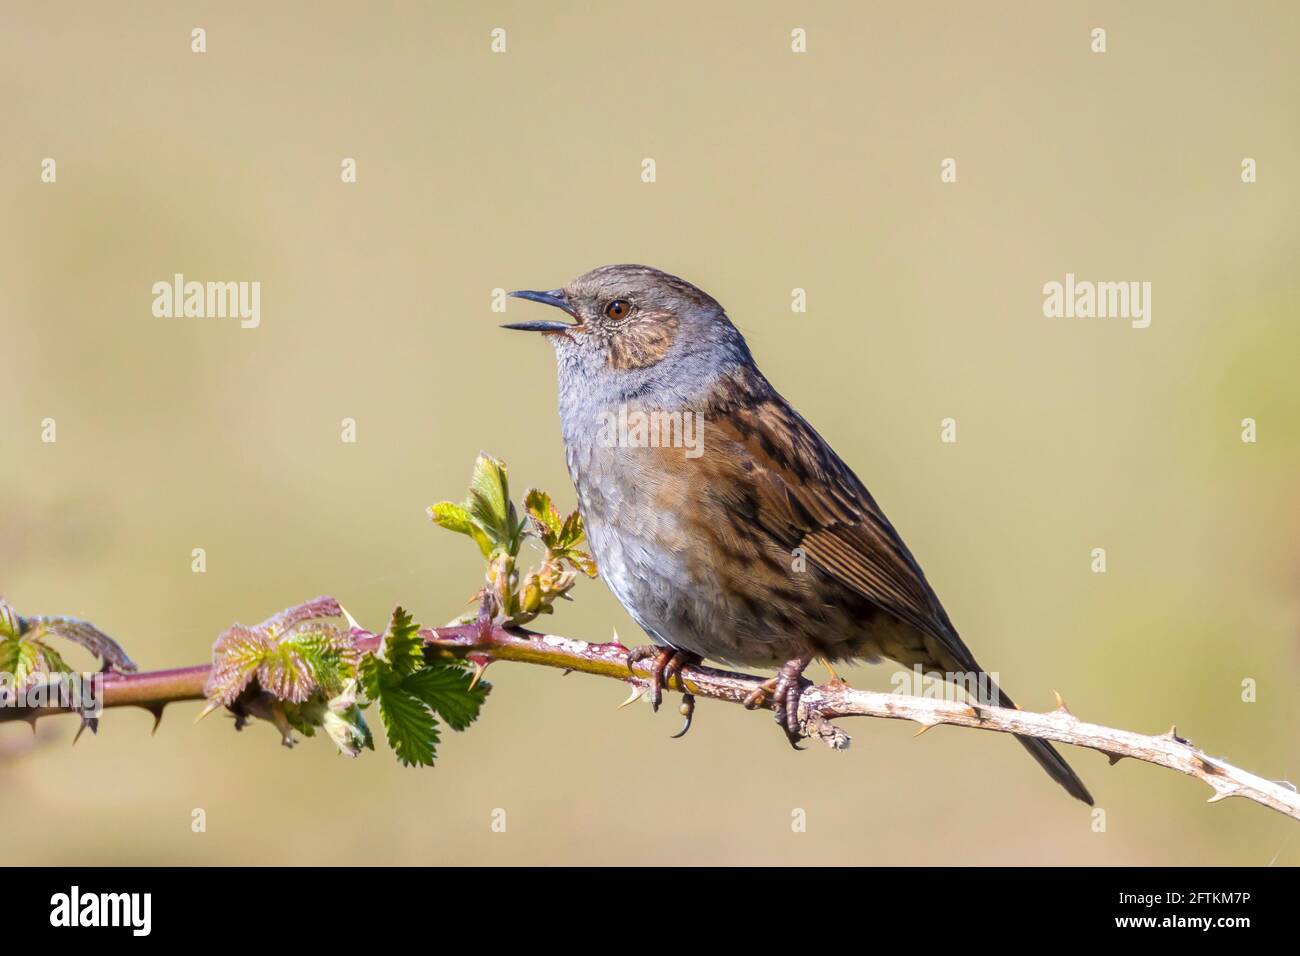 Close-up of a Dunnock, Prunella modularis, bird in a tree display and singing a early morning song during Springtime to attract a female. Stock Photo